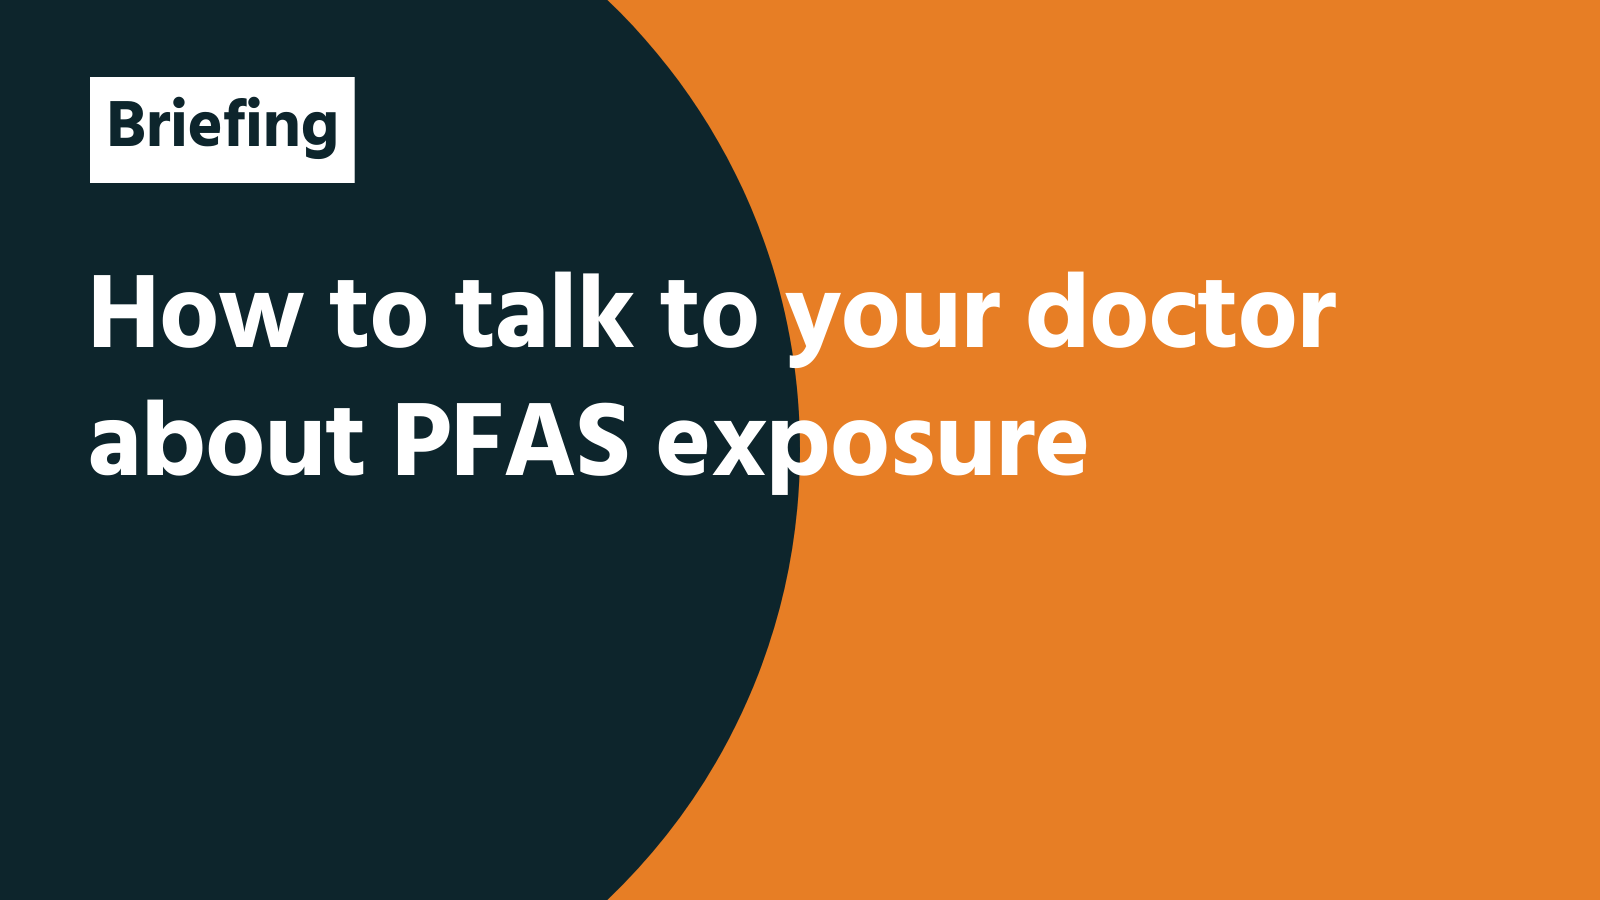 How to talk to your doctor about PFAS exposure